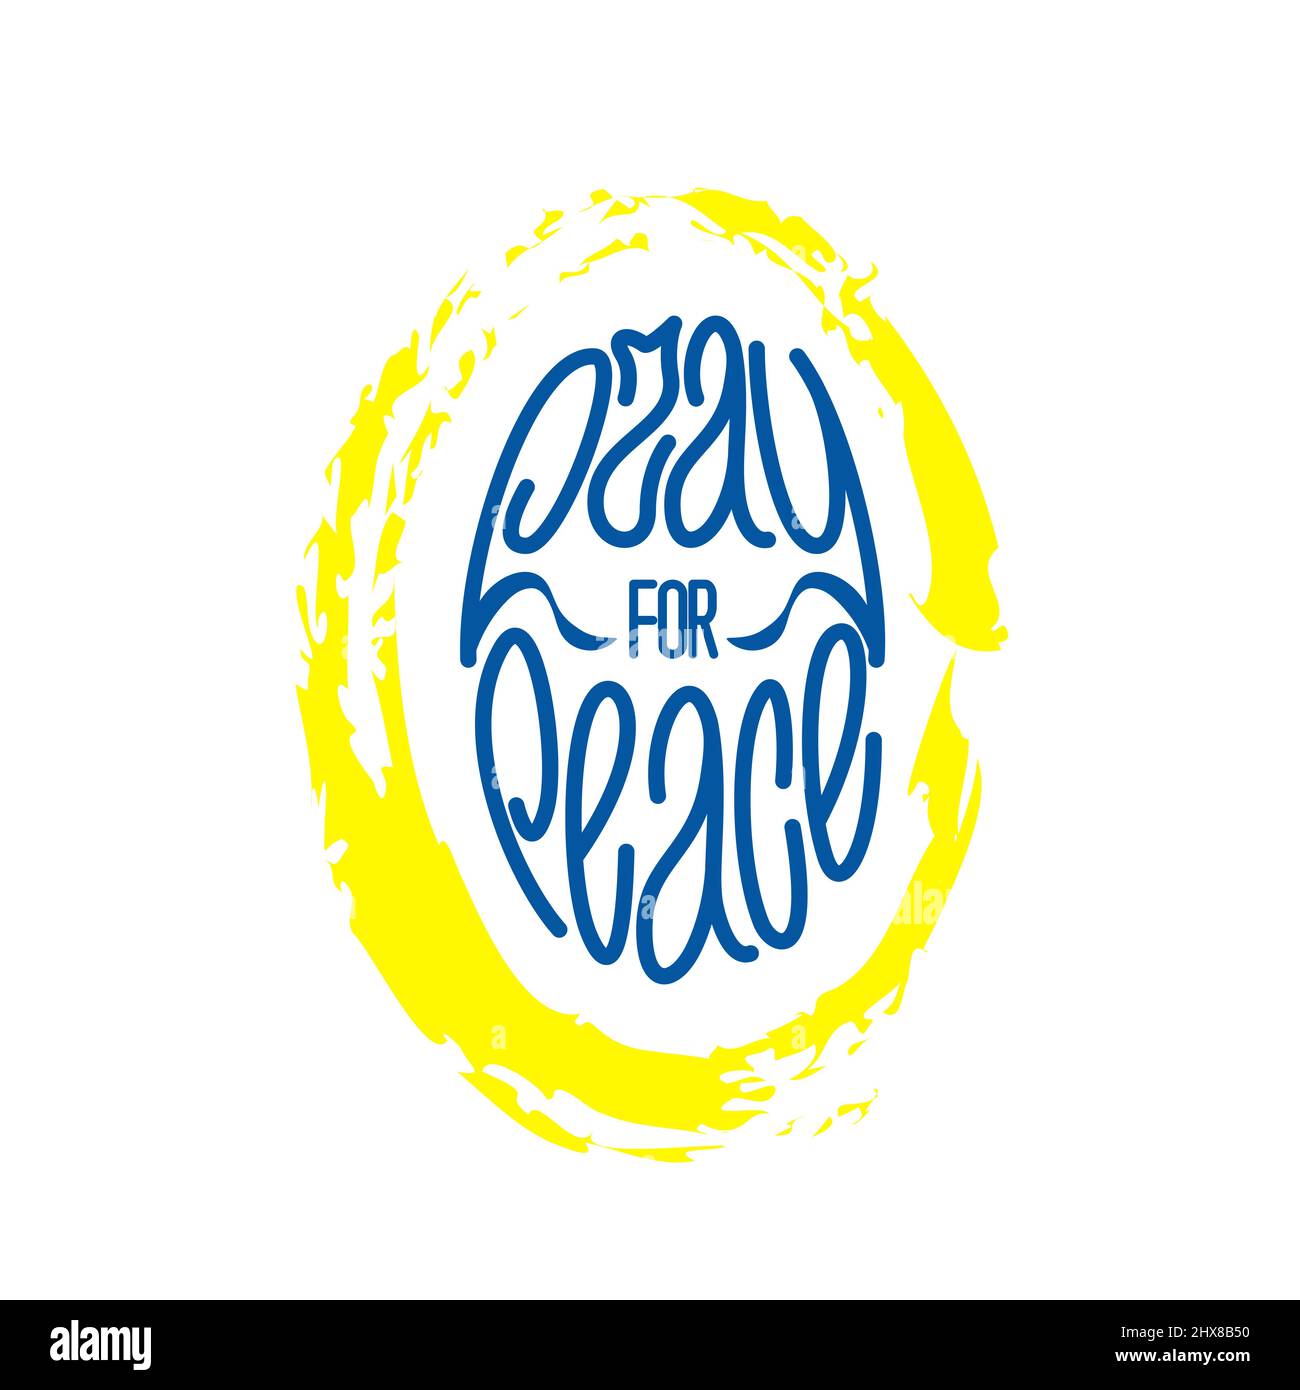 Pray for peace. Hand drawn lettering fit in egg shaped brush stroke. Easter. Peaceful movement. Vector illustration Stock Vector